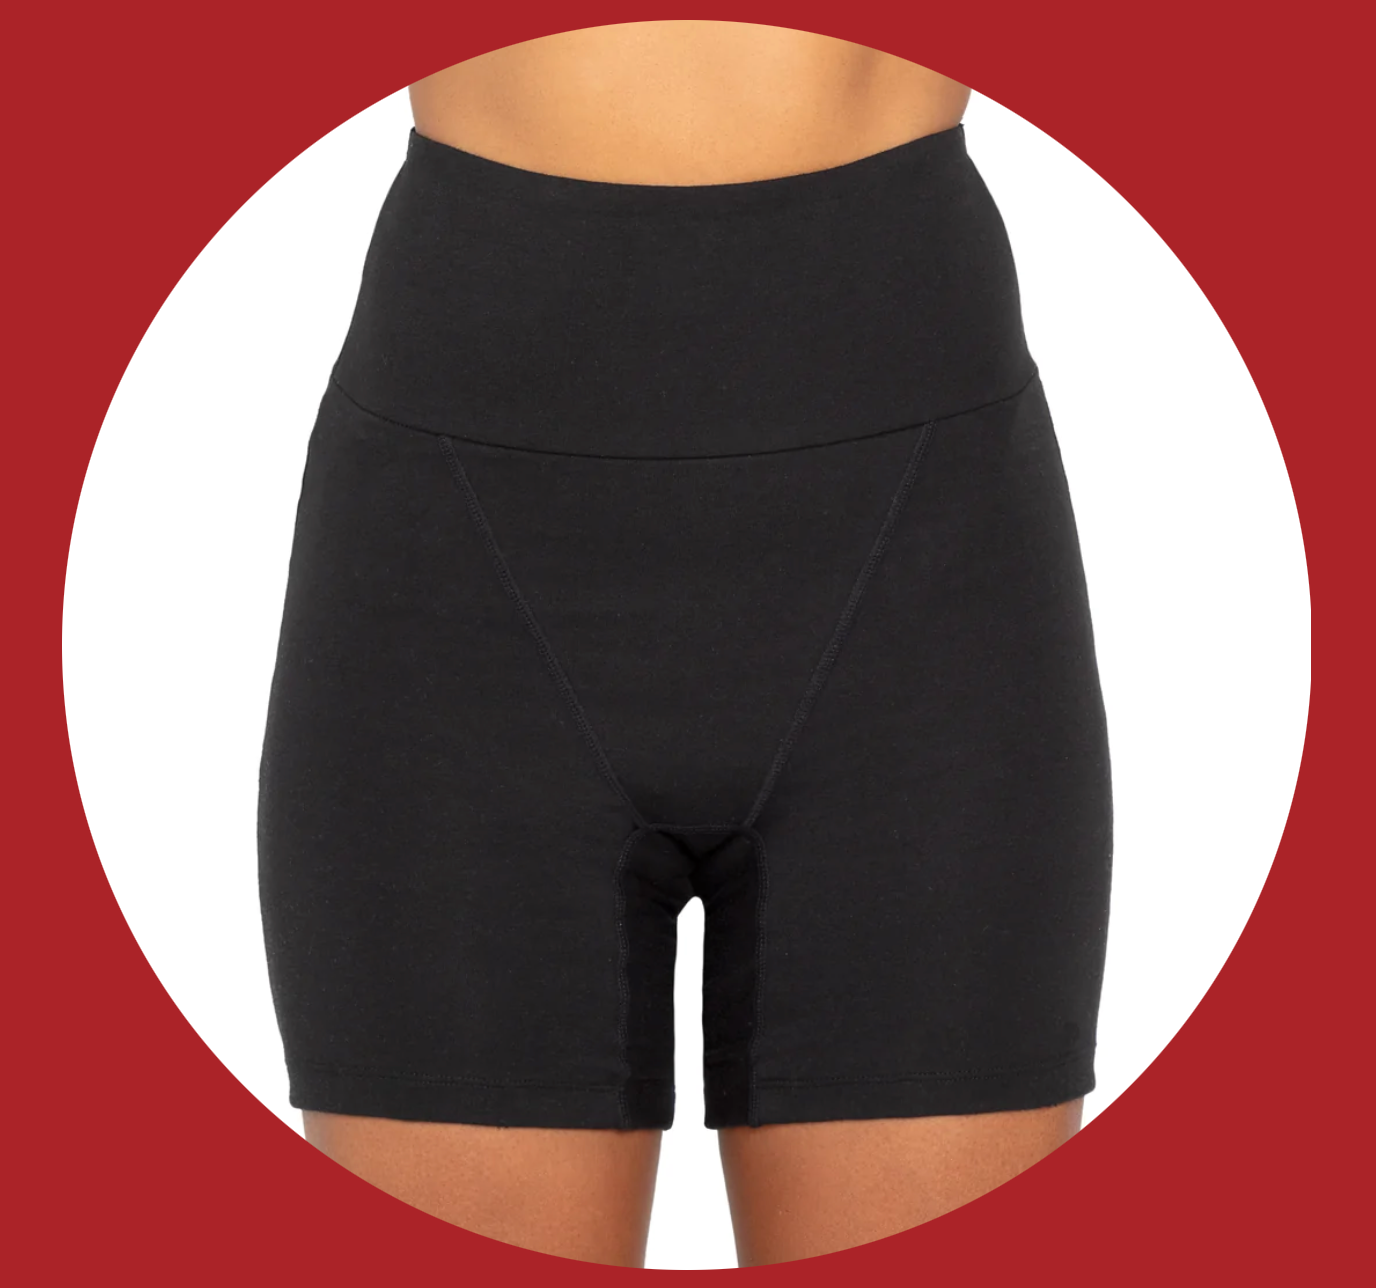 Farmers - Introducing new Bonds Bloody Comfy Period Undies. Leak proof period  undies that go with your flow and keep you feeling comfy and confident.  Washable, reusable, sustainable, and available in much-loved